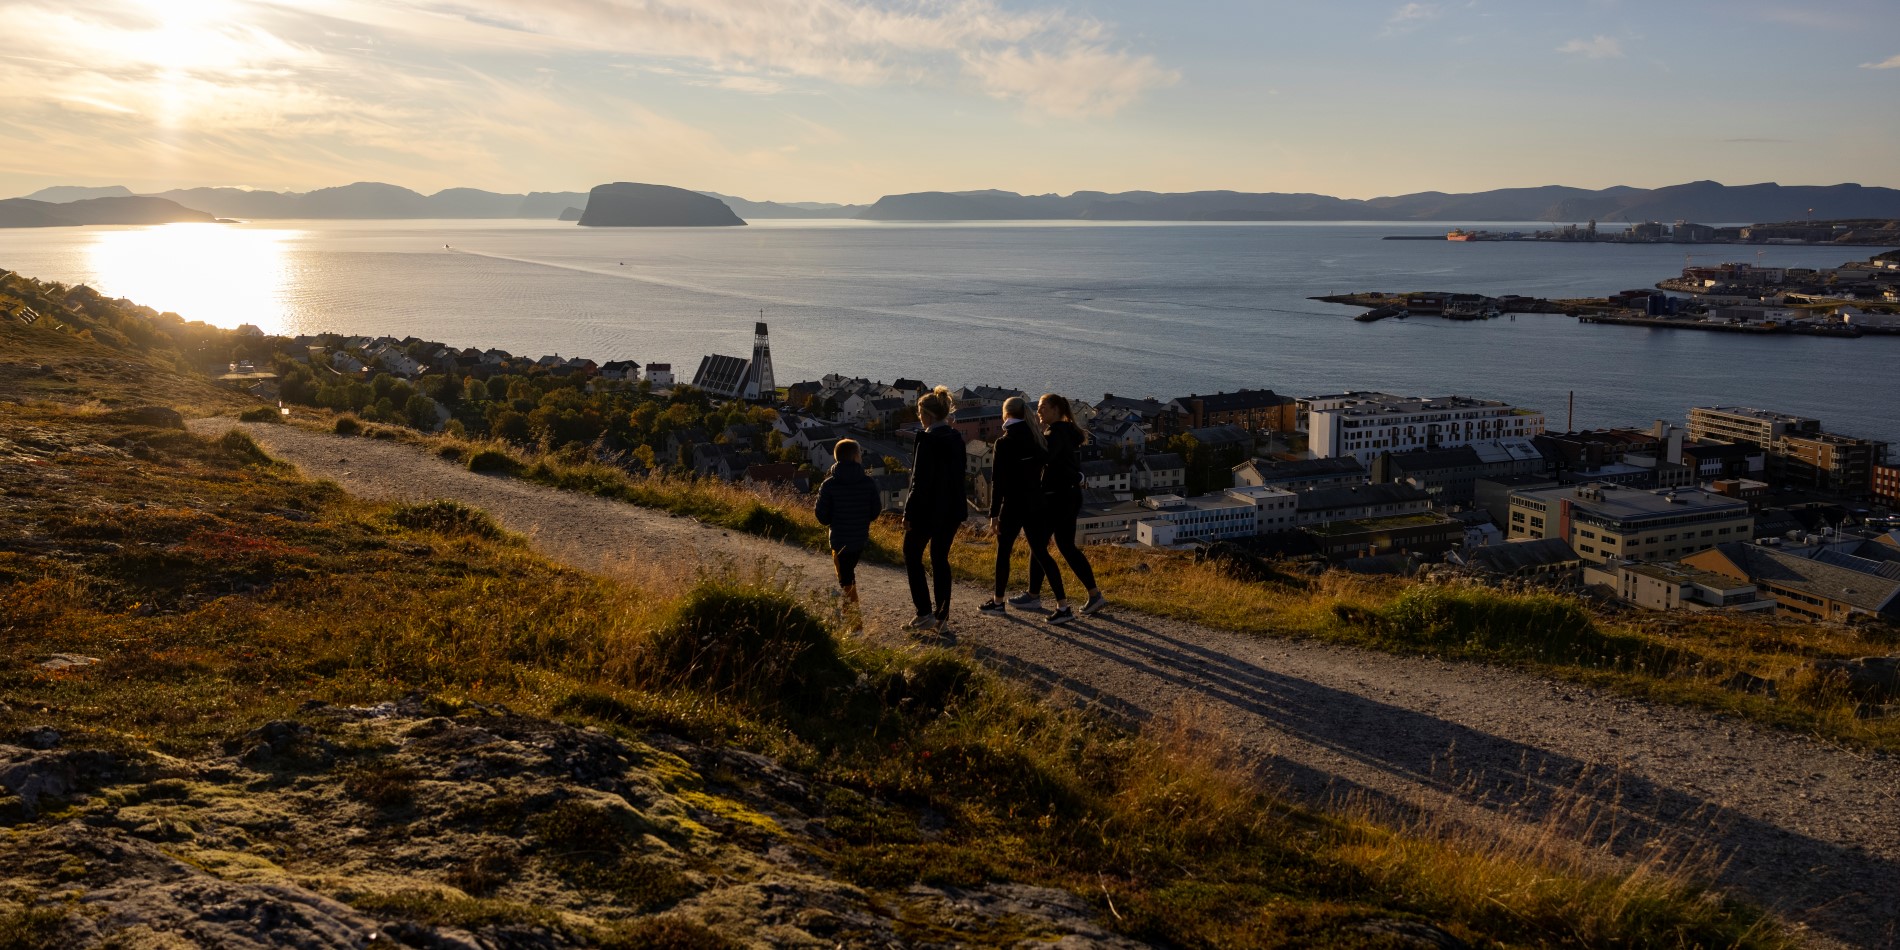 It's sunset and four people are walking in the hillside. Below they you can see the town of Hammerfest